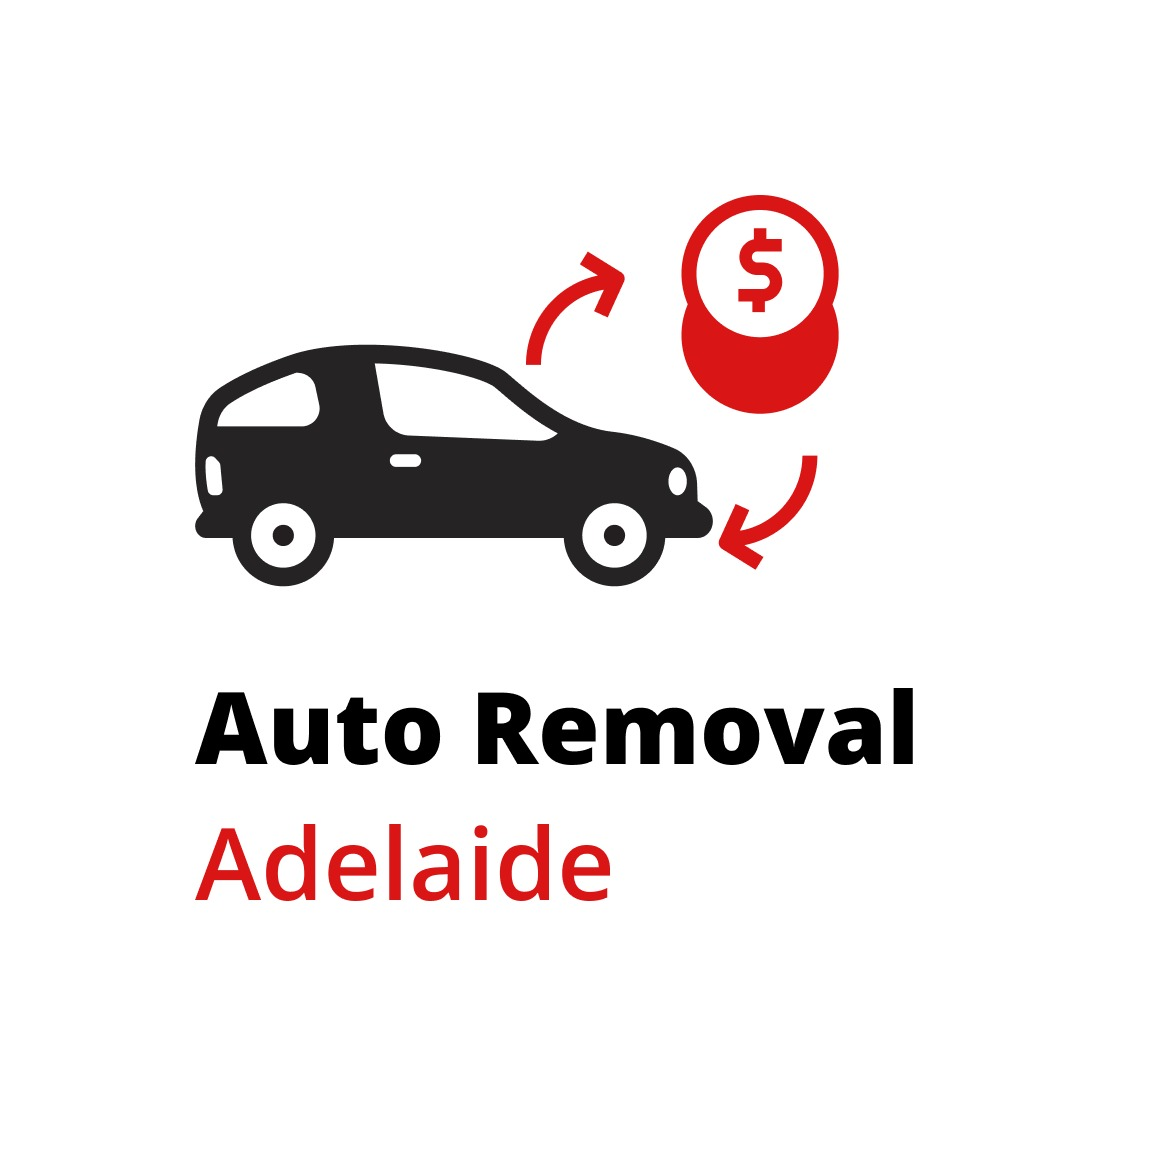 Auto Removal Adelaide Adelaide